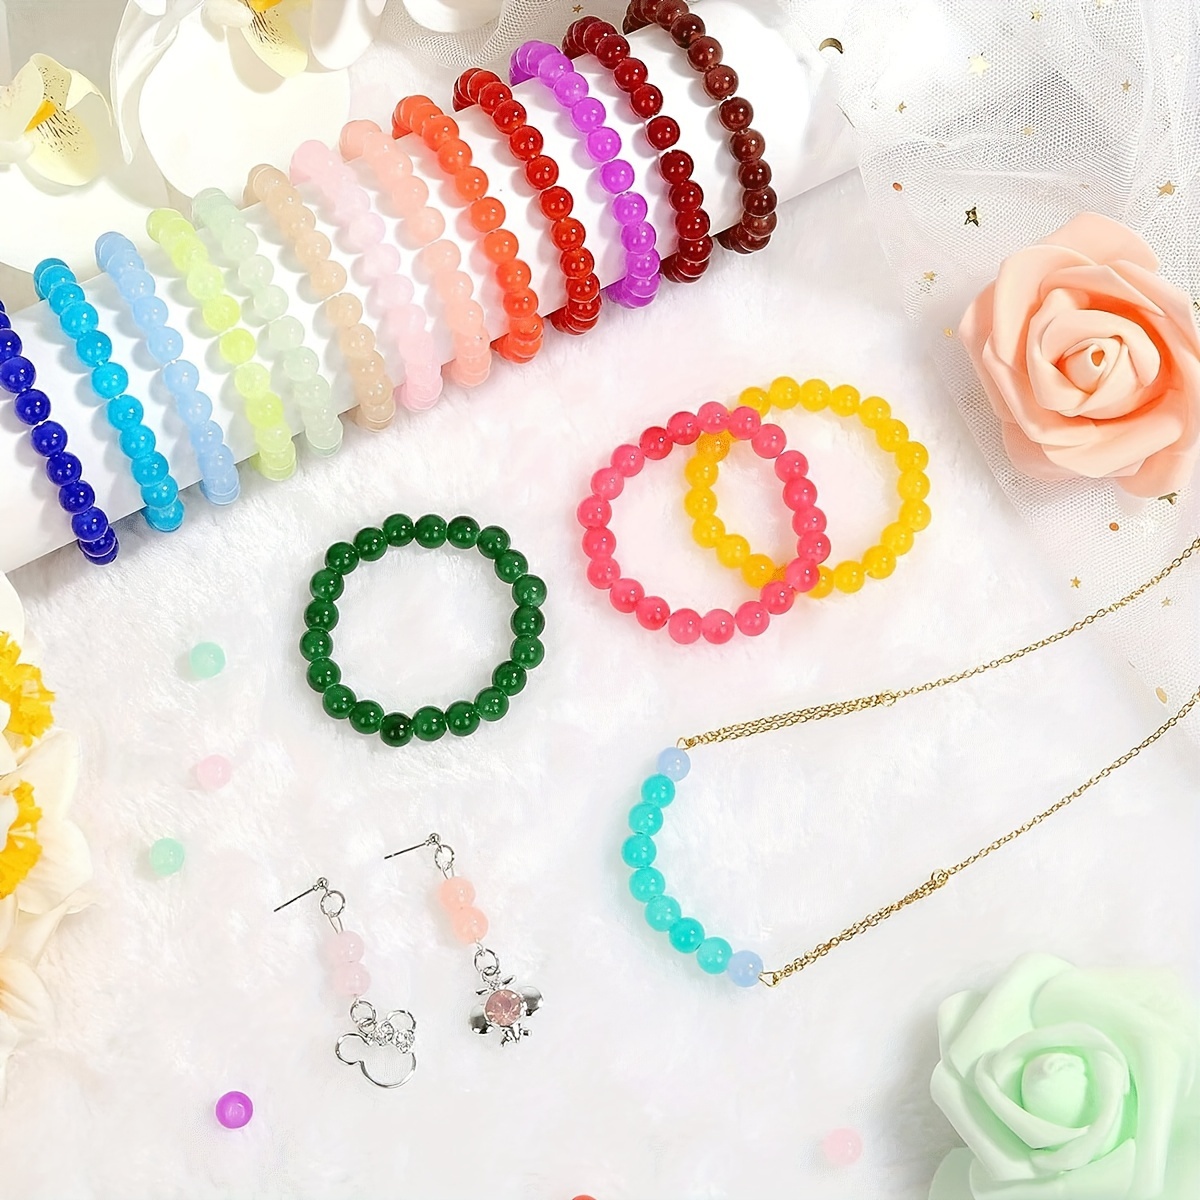 Lucky Goddness Unique Beads for Jewelry Making 200pcs 8mm Round Glass Beads  AB Colorful Crystal Beadswith 2 Kind of Frosted Beads- Perf - Unique Beads  for Jewelry Making 200pcs 8mm Round Glass